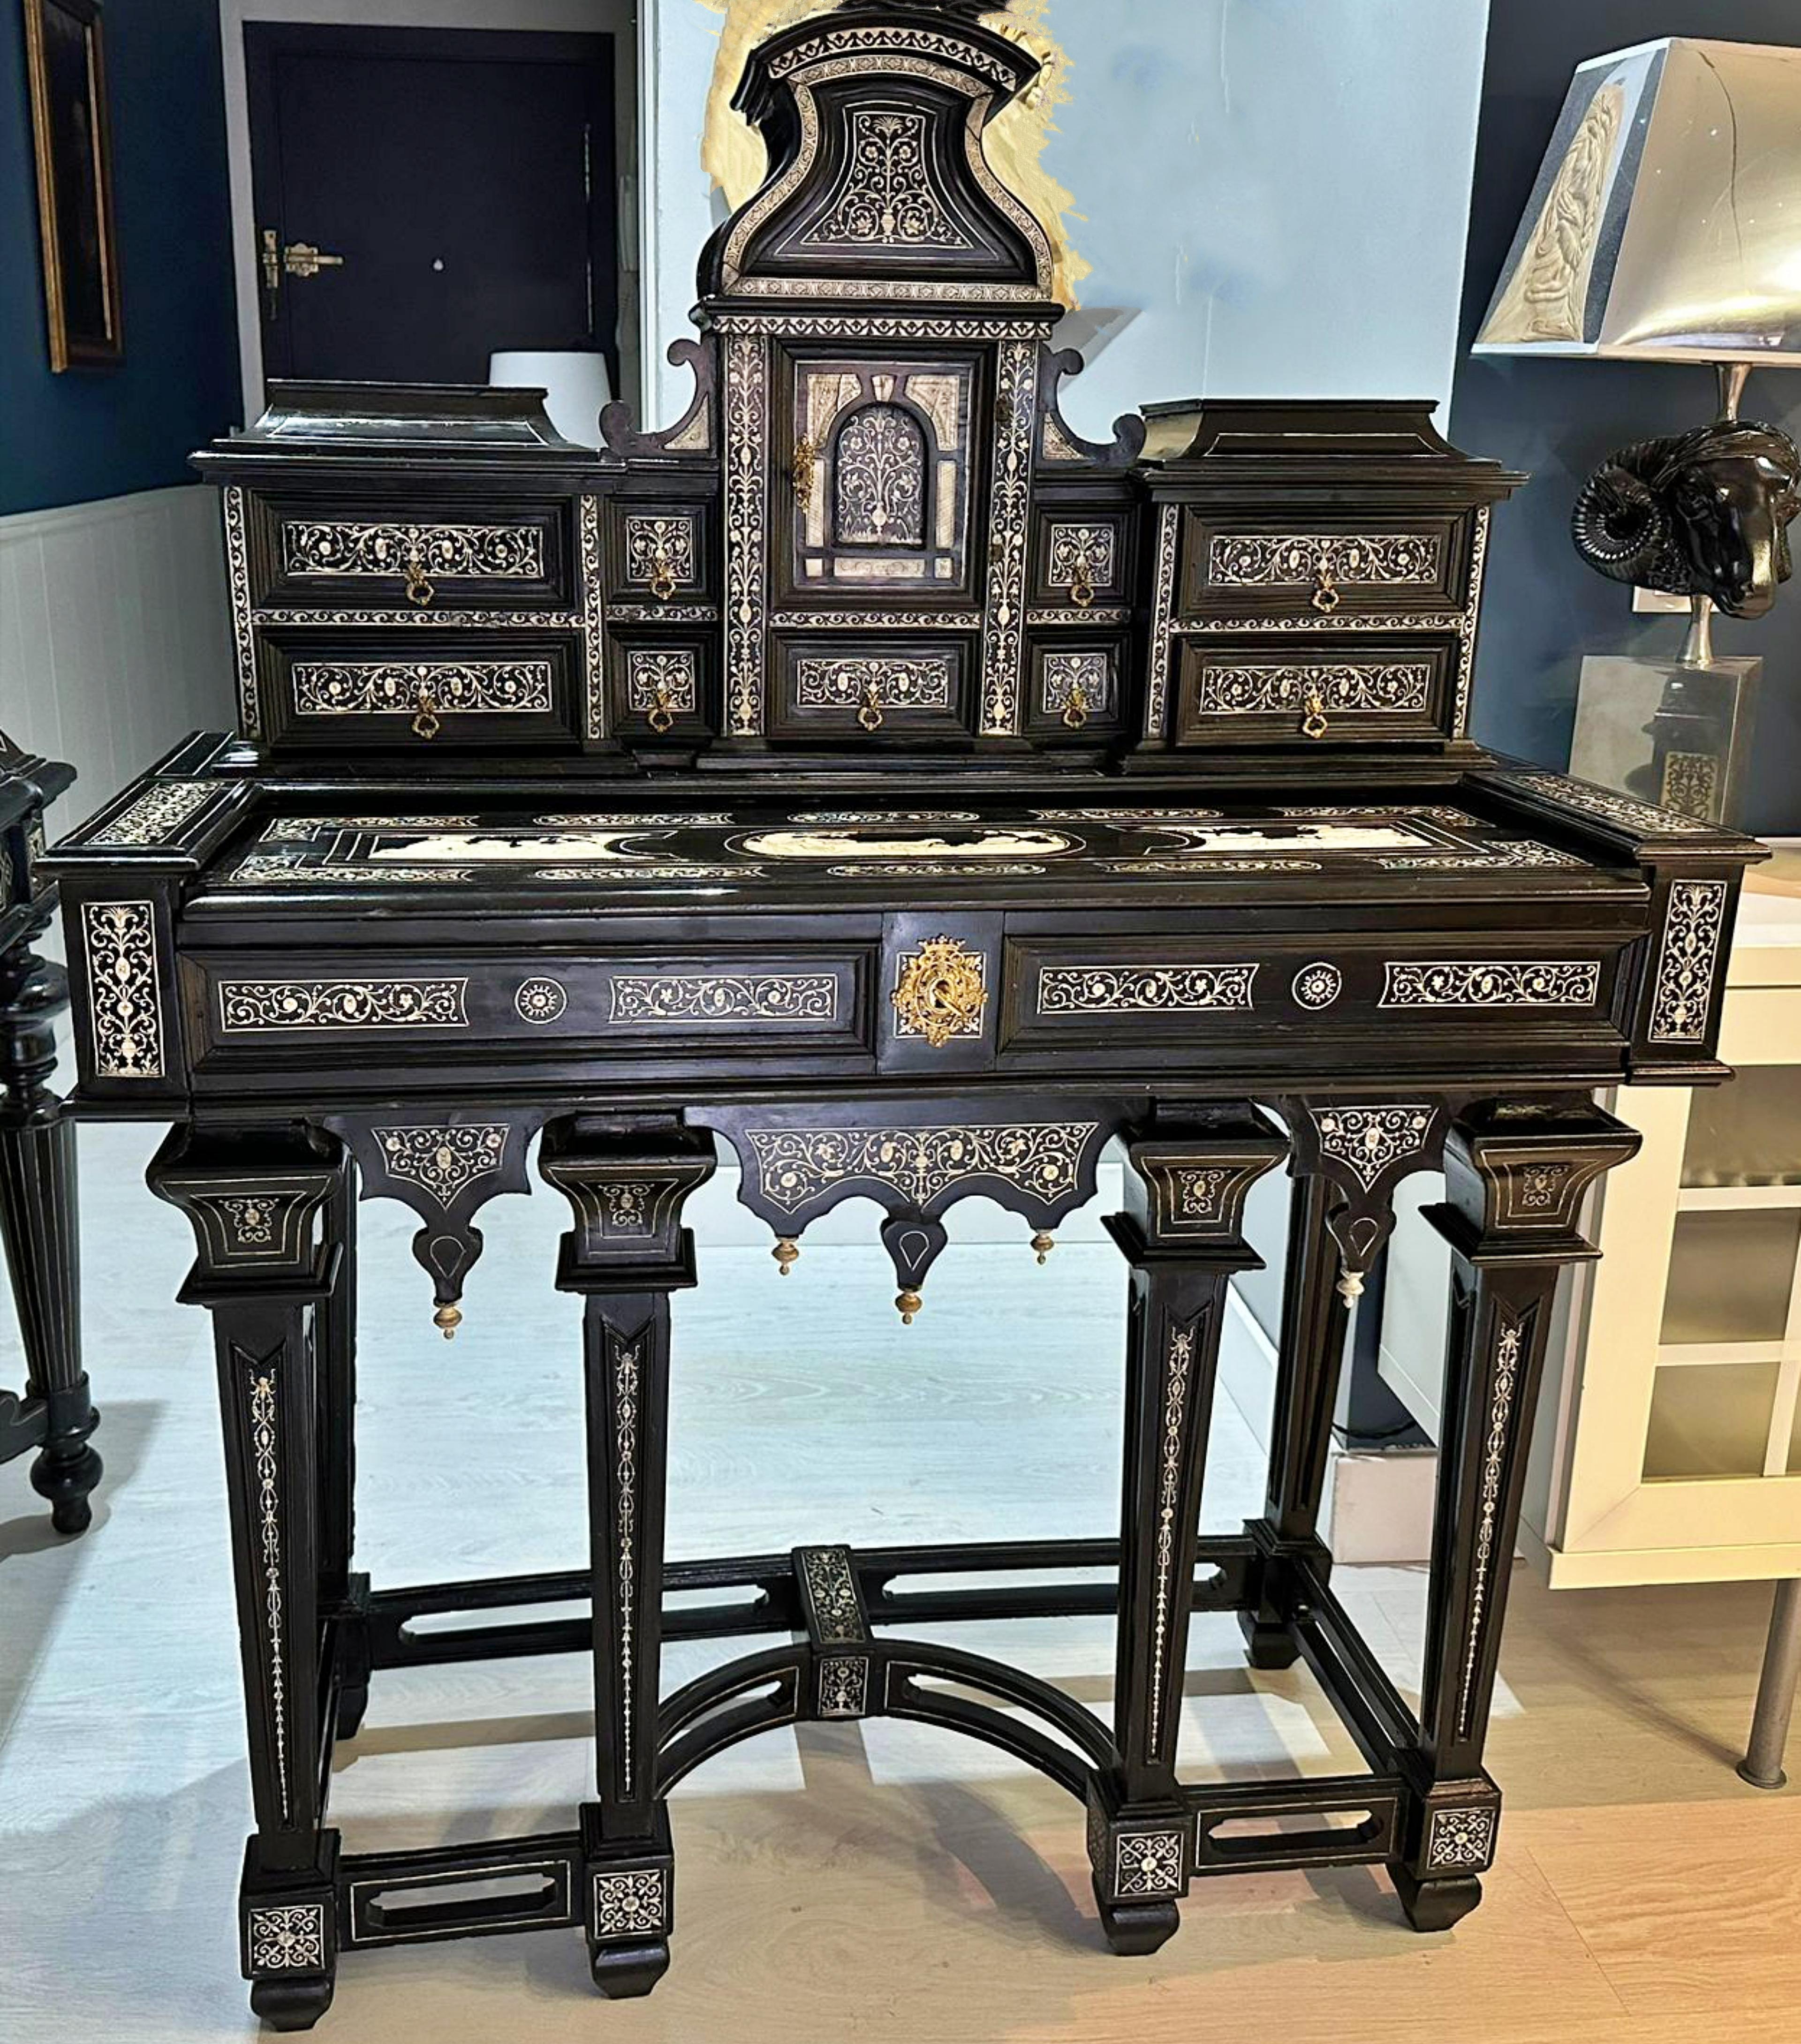 Joseph Bertin - Milan - Ebene Desk 19th Century

Magnificent ebene desk by the cabinetmaker Joseph Bertin from the 19th century with the manufacturer's signature and stamp.

This desk has been completely restored, following exhaustive work in